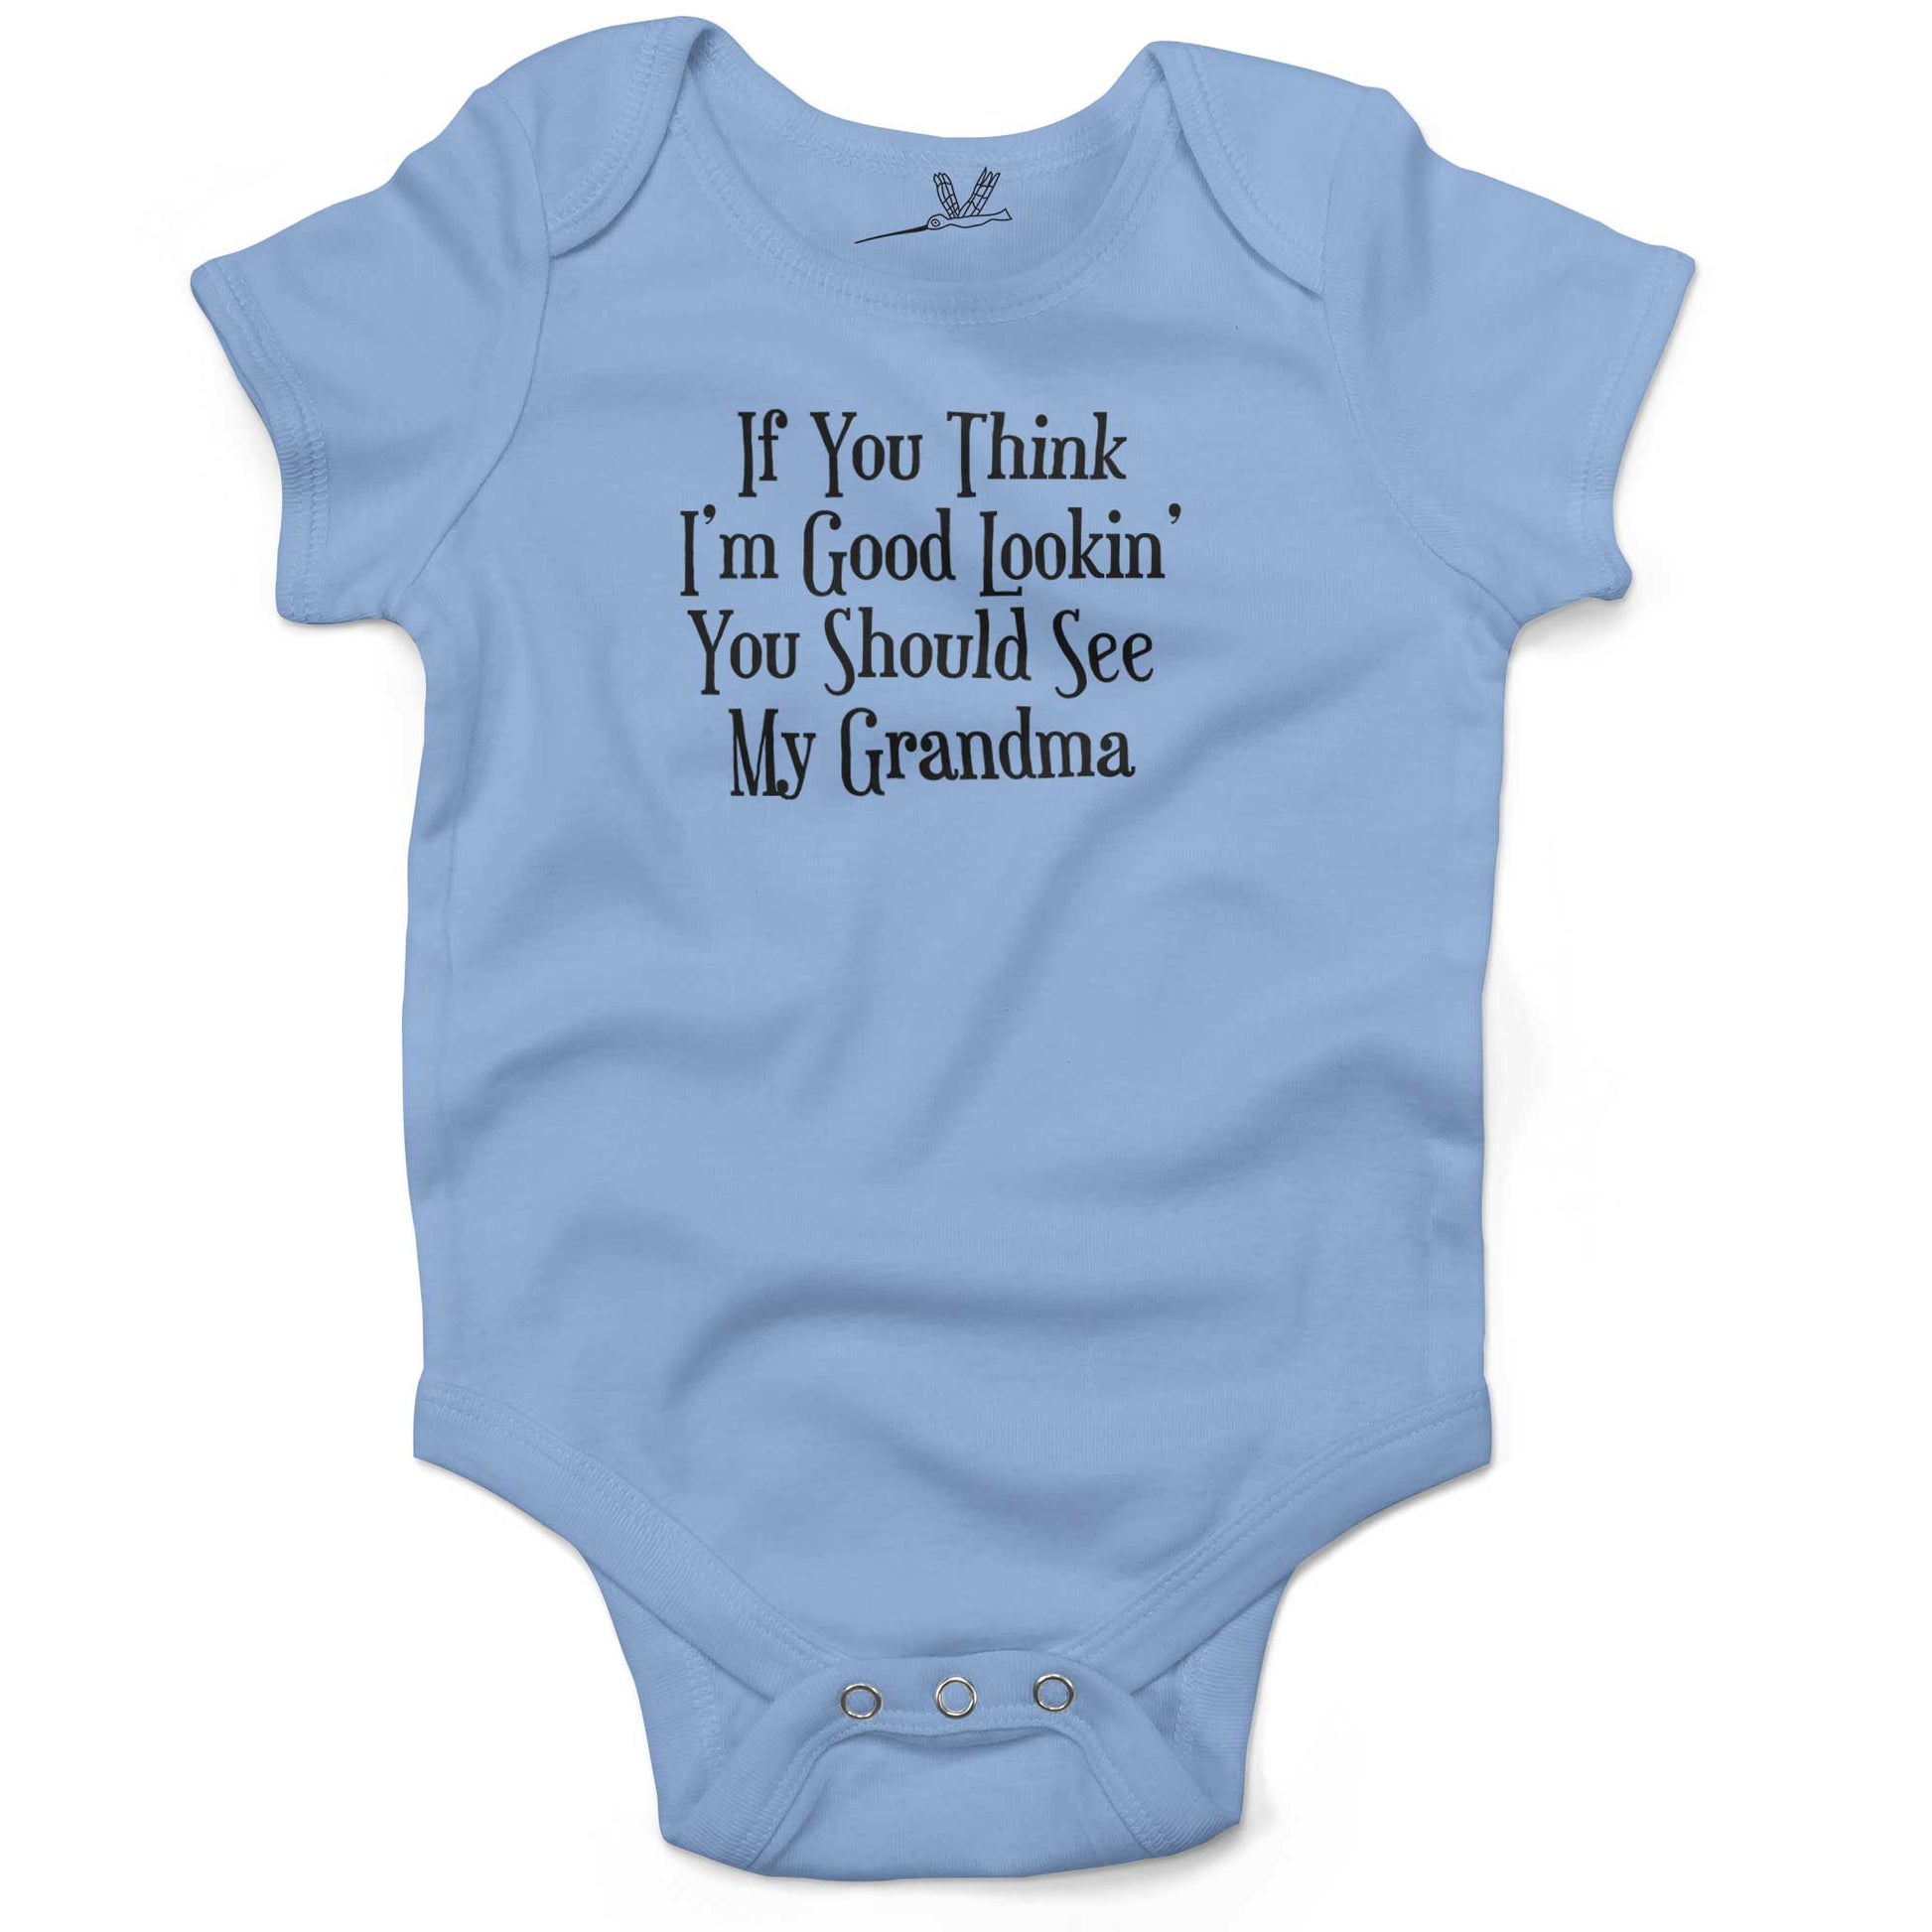 If You Think I'm Good Lookin', You Should See My Grandma Infant Bodysuit or Raglan Tee-Organic Baby Blue-3-6 months